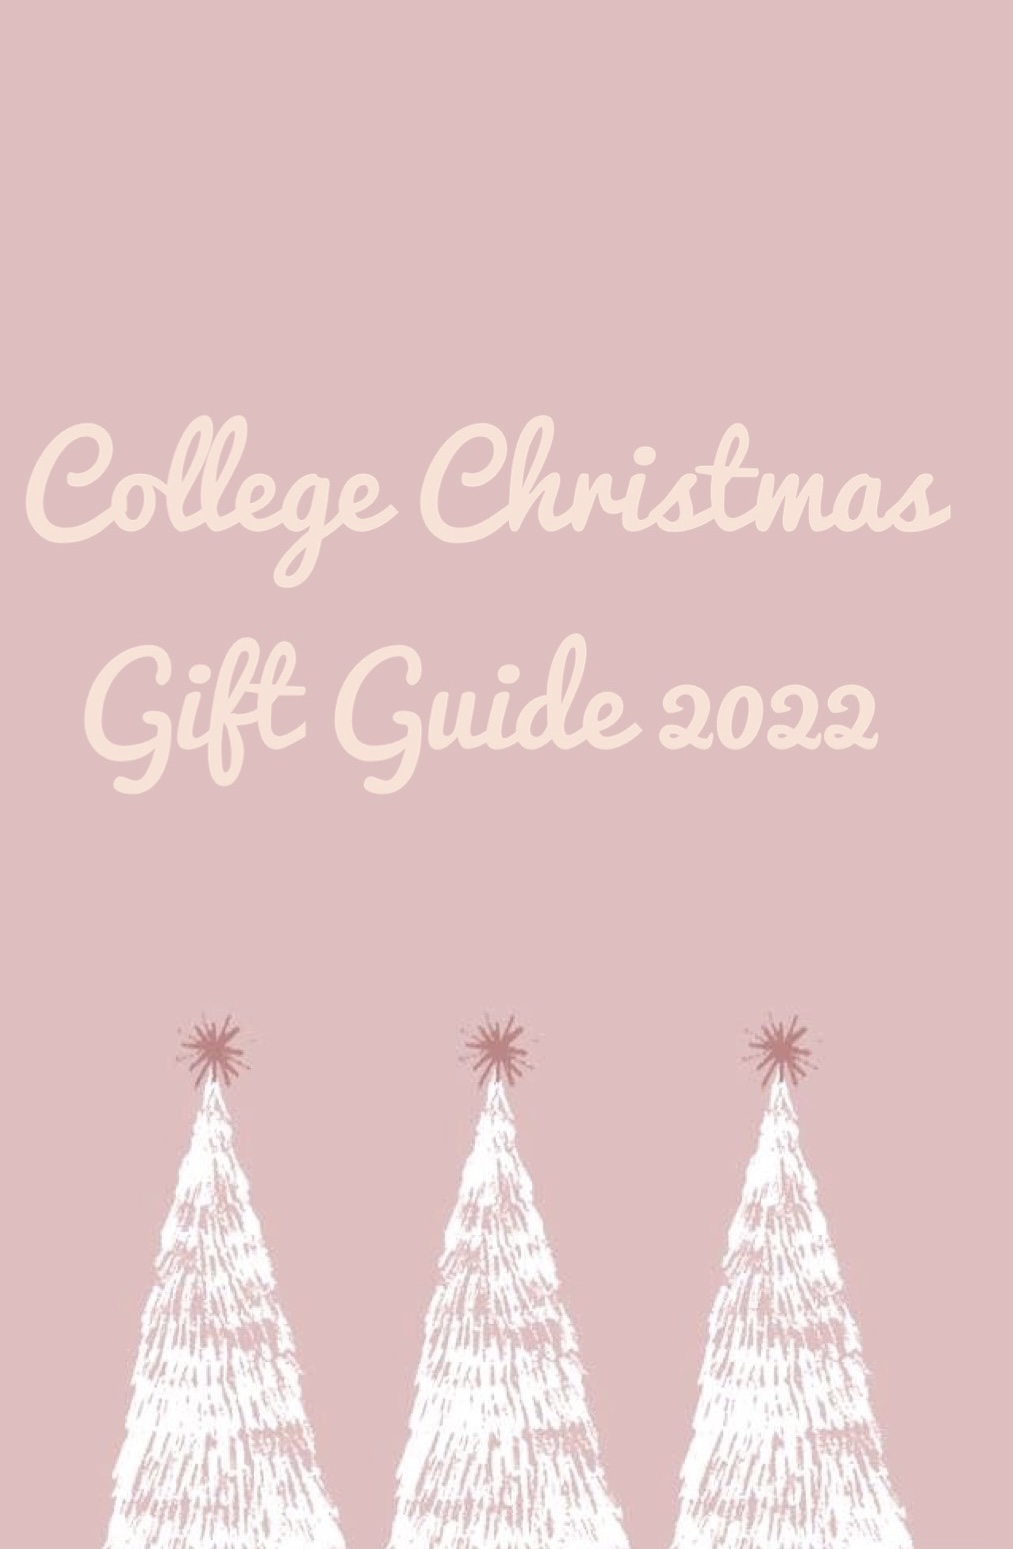 College Christmas Gift Guide 2022